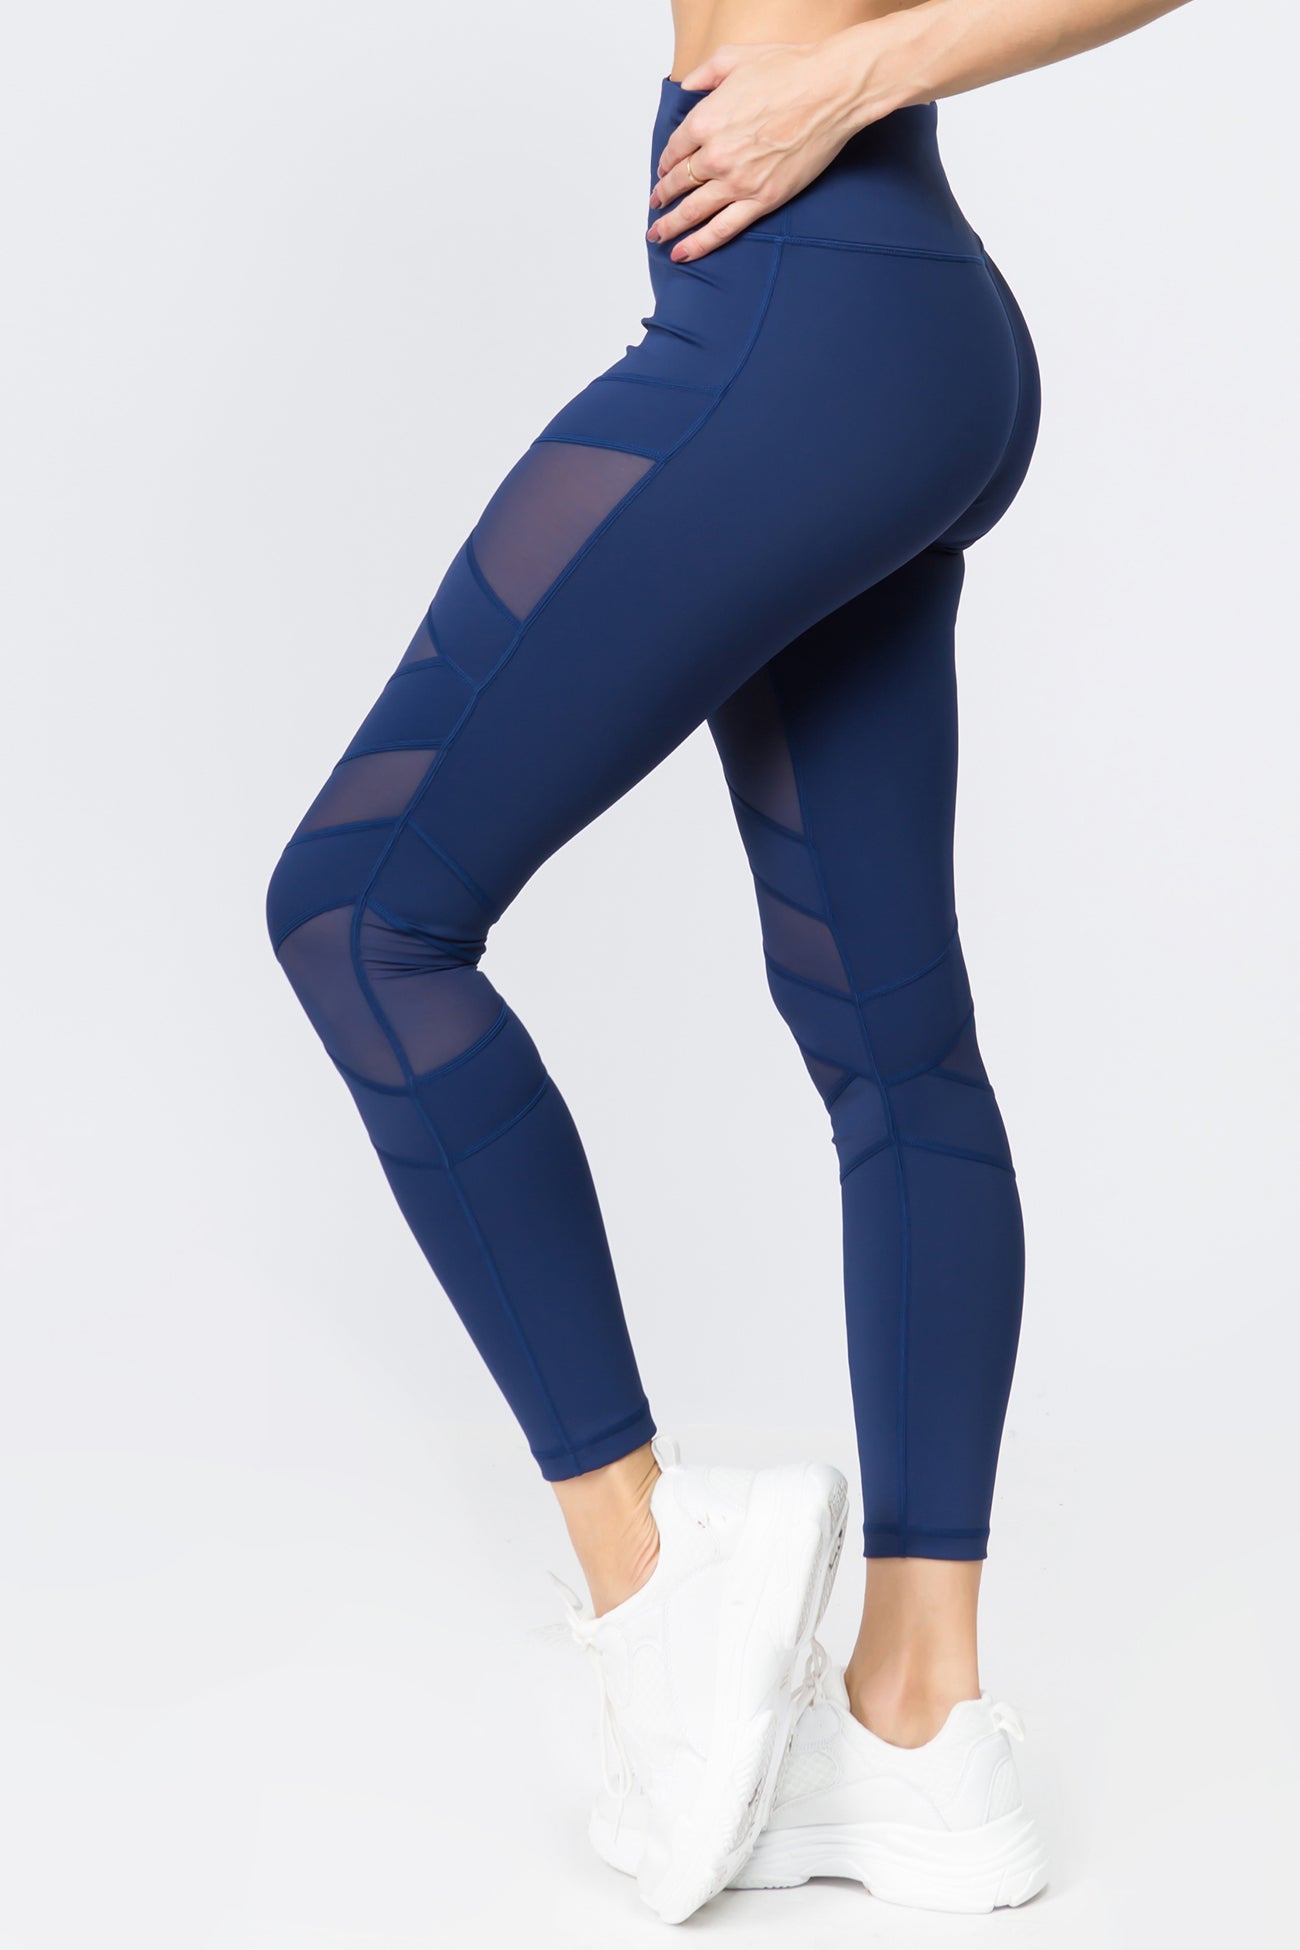 ICONOFLASH Women's Bow Cutout Active Leggings (Black, Small) at   Women's Clothing store